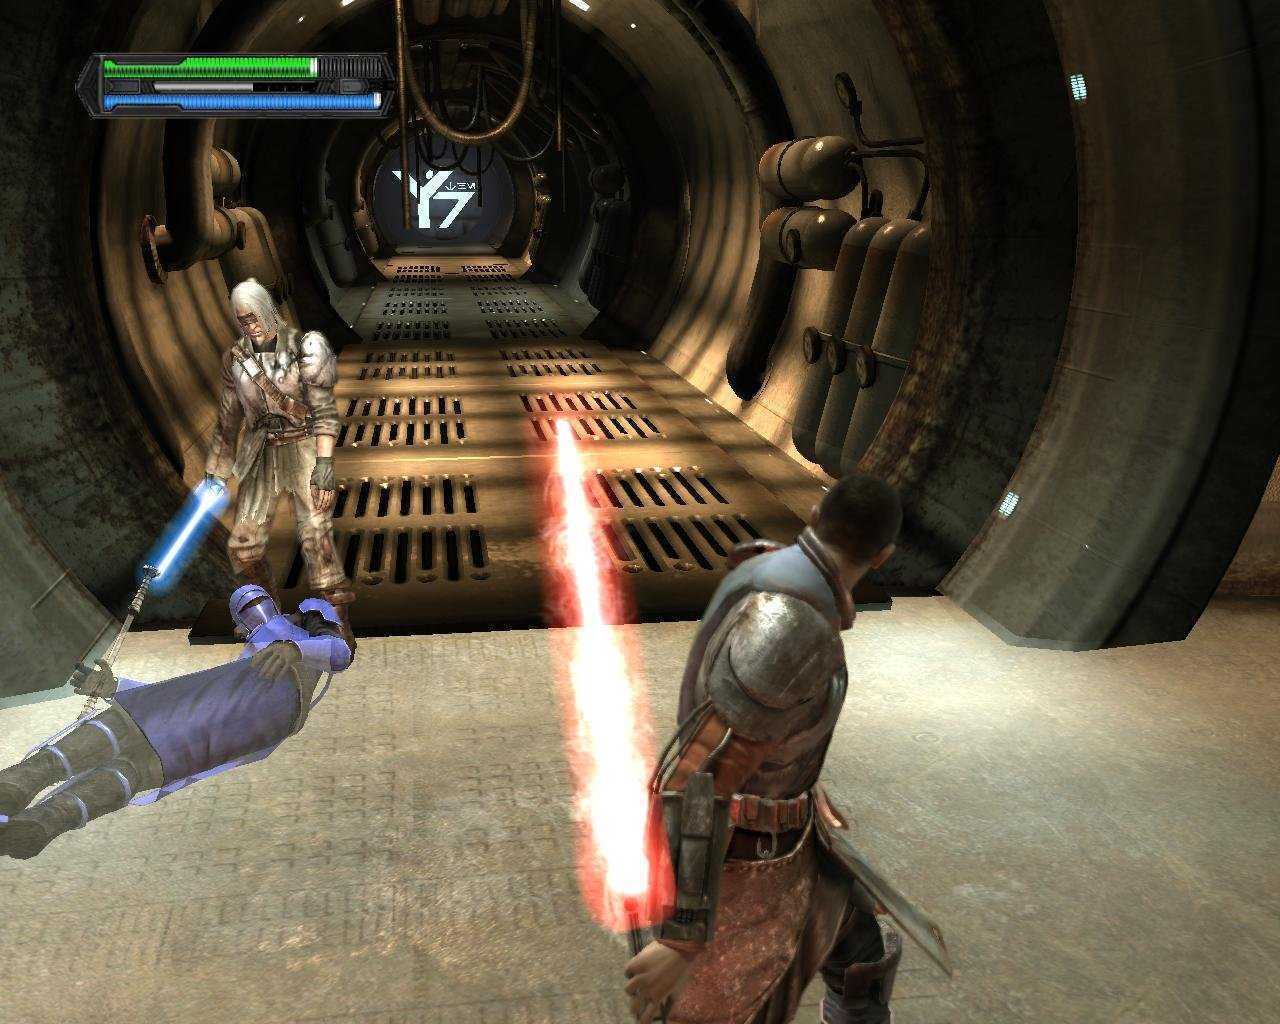 Игры star games. Star Wars the Force unleashed Ultimate Sith Edition (2009). Стар ВАРС the Force unleashed 1. Игра Star Wars: the Force unleashed II. Star Wars: the Force unleashed - Ultimate Sith Edition.